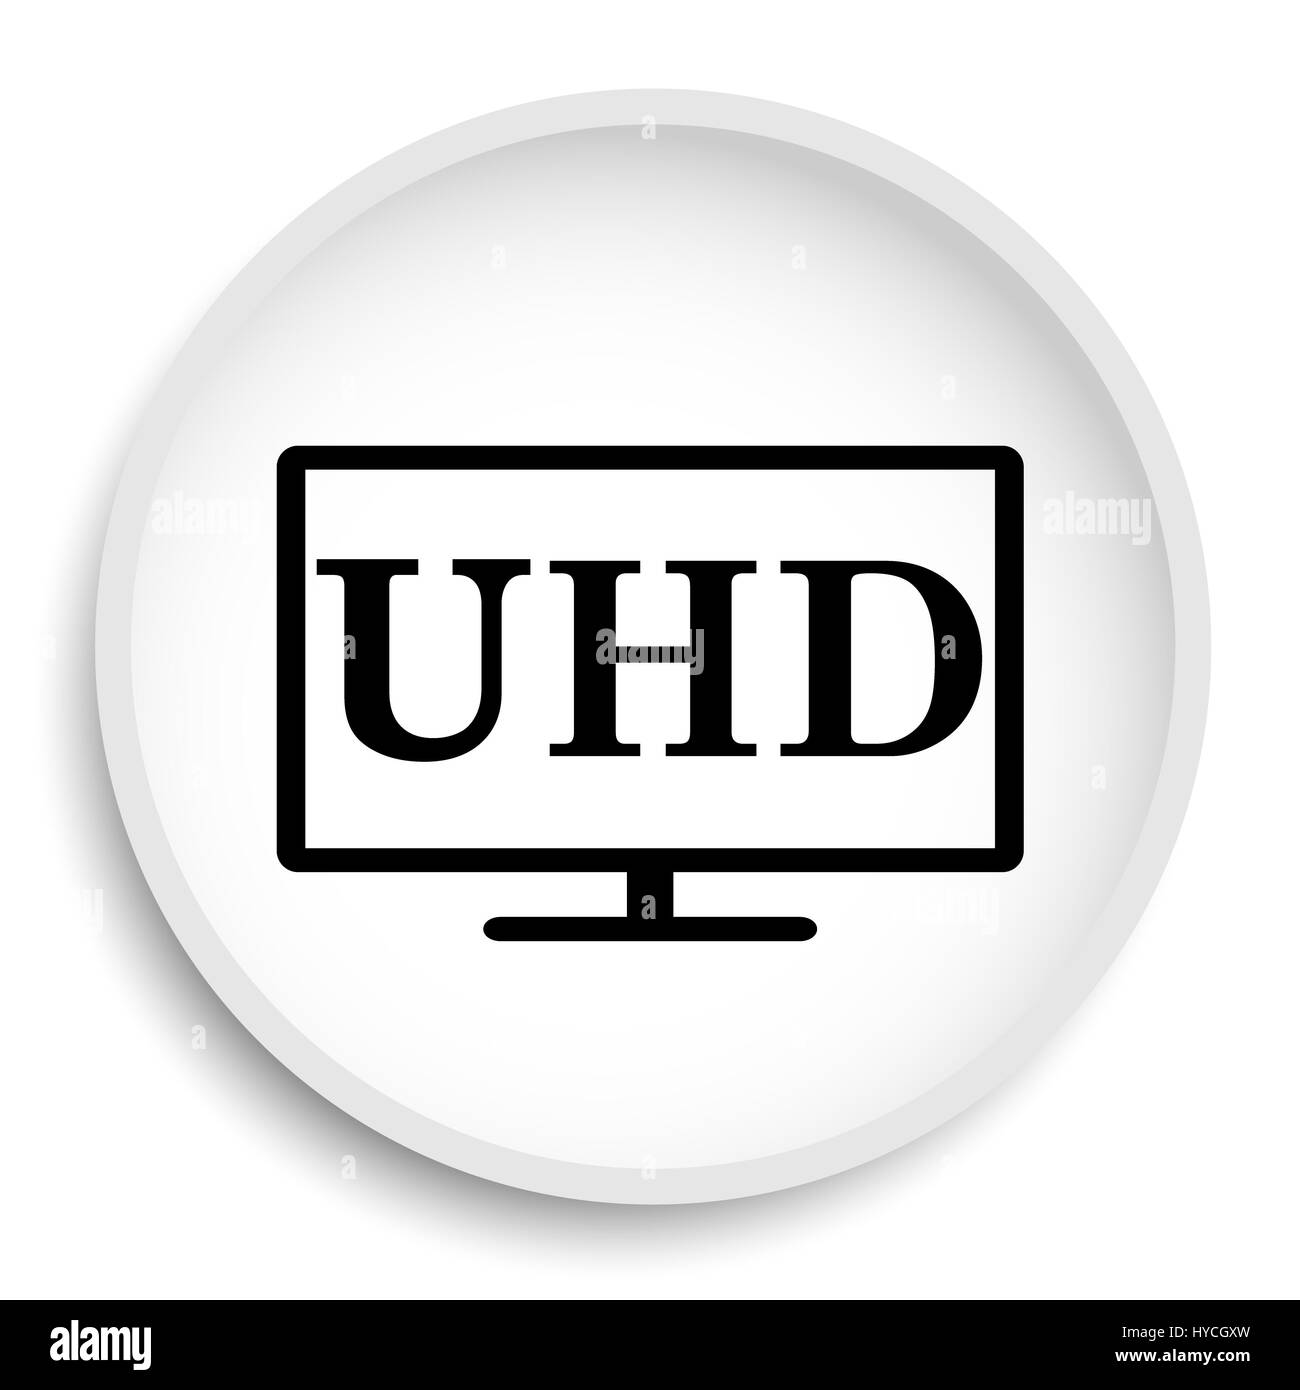 Ultra HD icon. Ultra HD website button on white background. Stock Photo